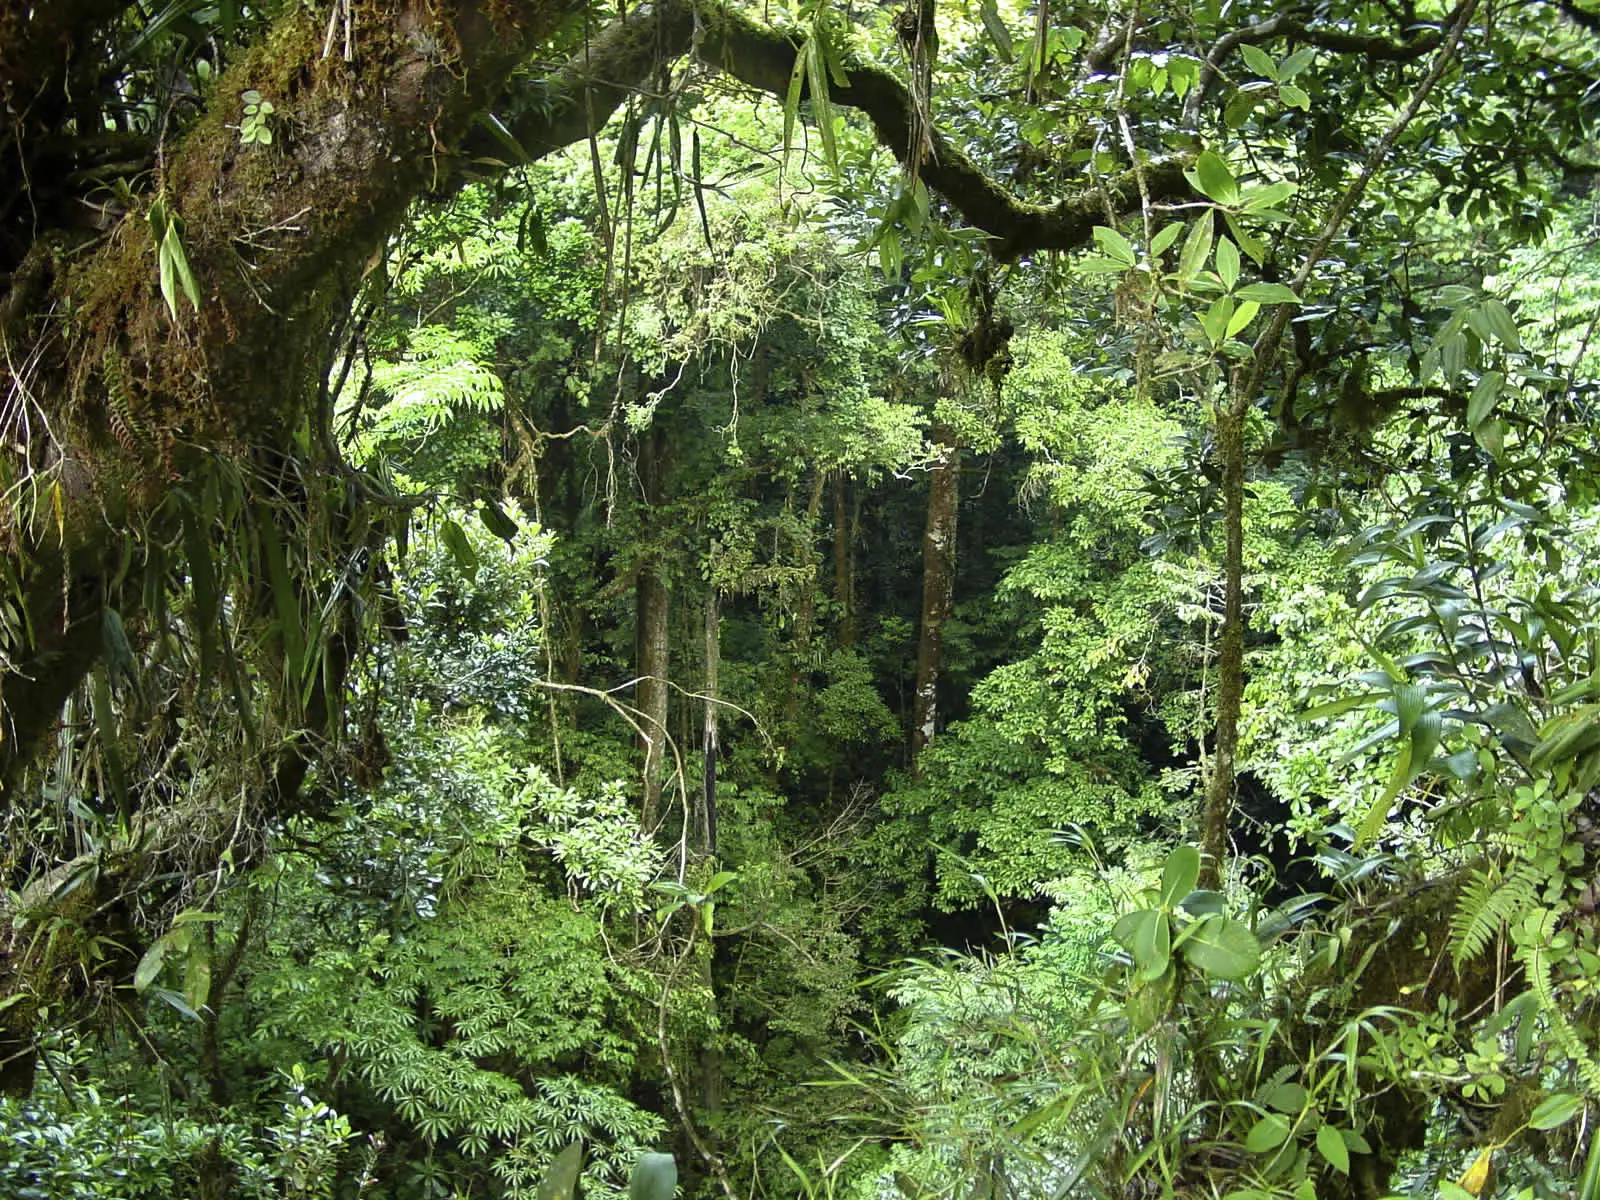  Countries Unite to Save Major Tropical Forests. (Photo Internet reproduction)